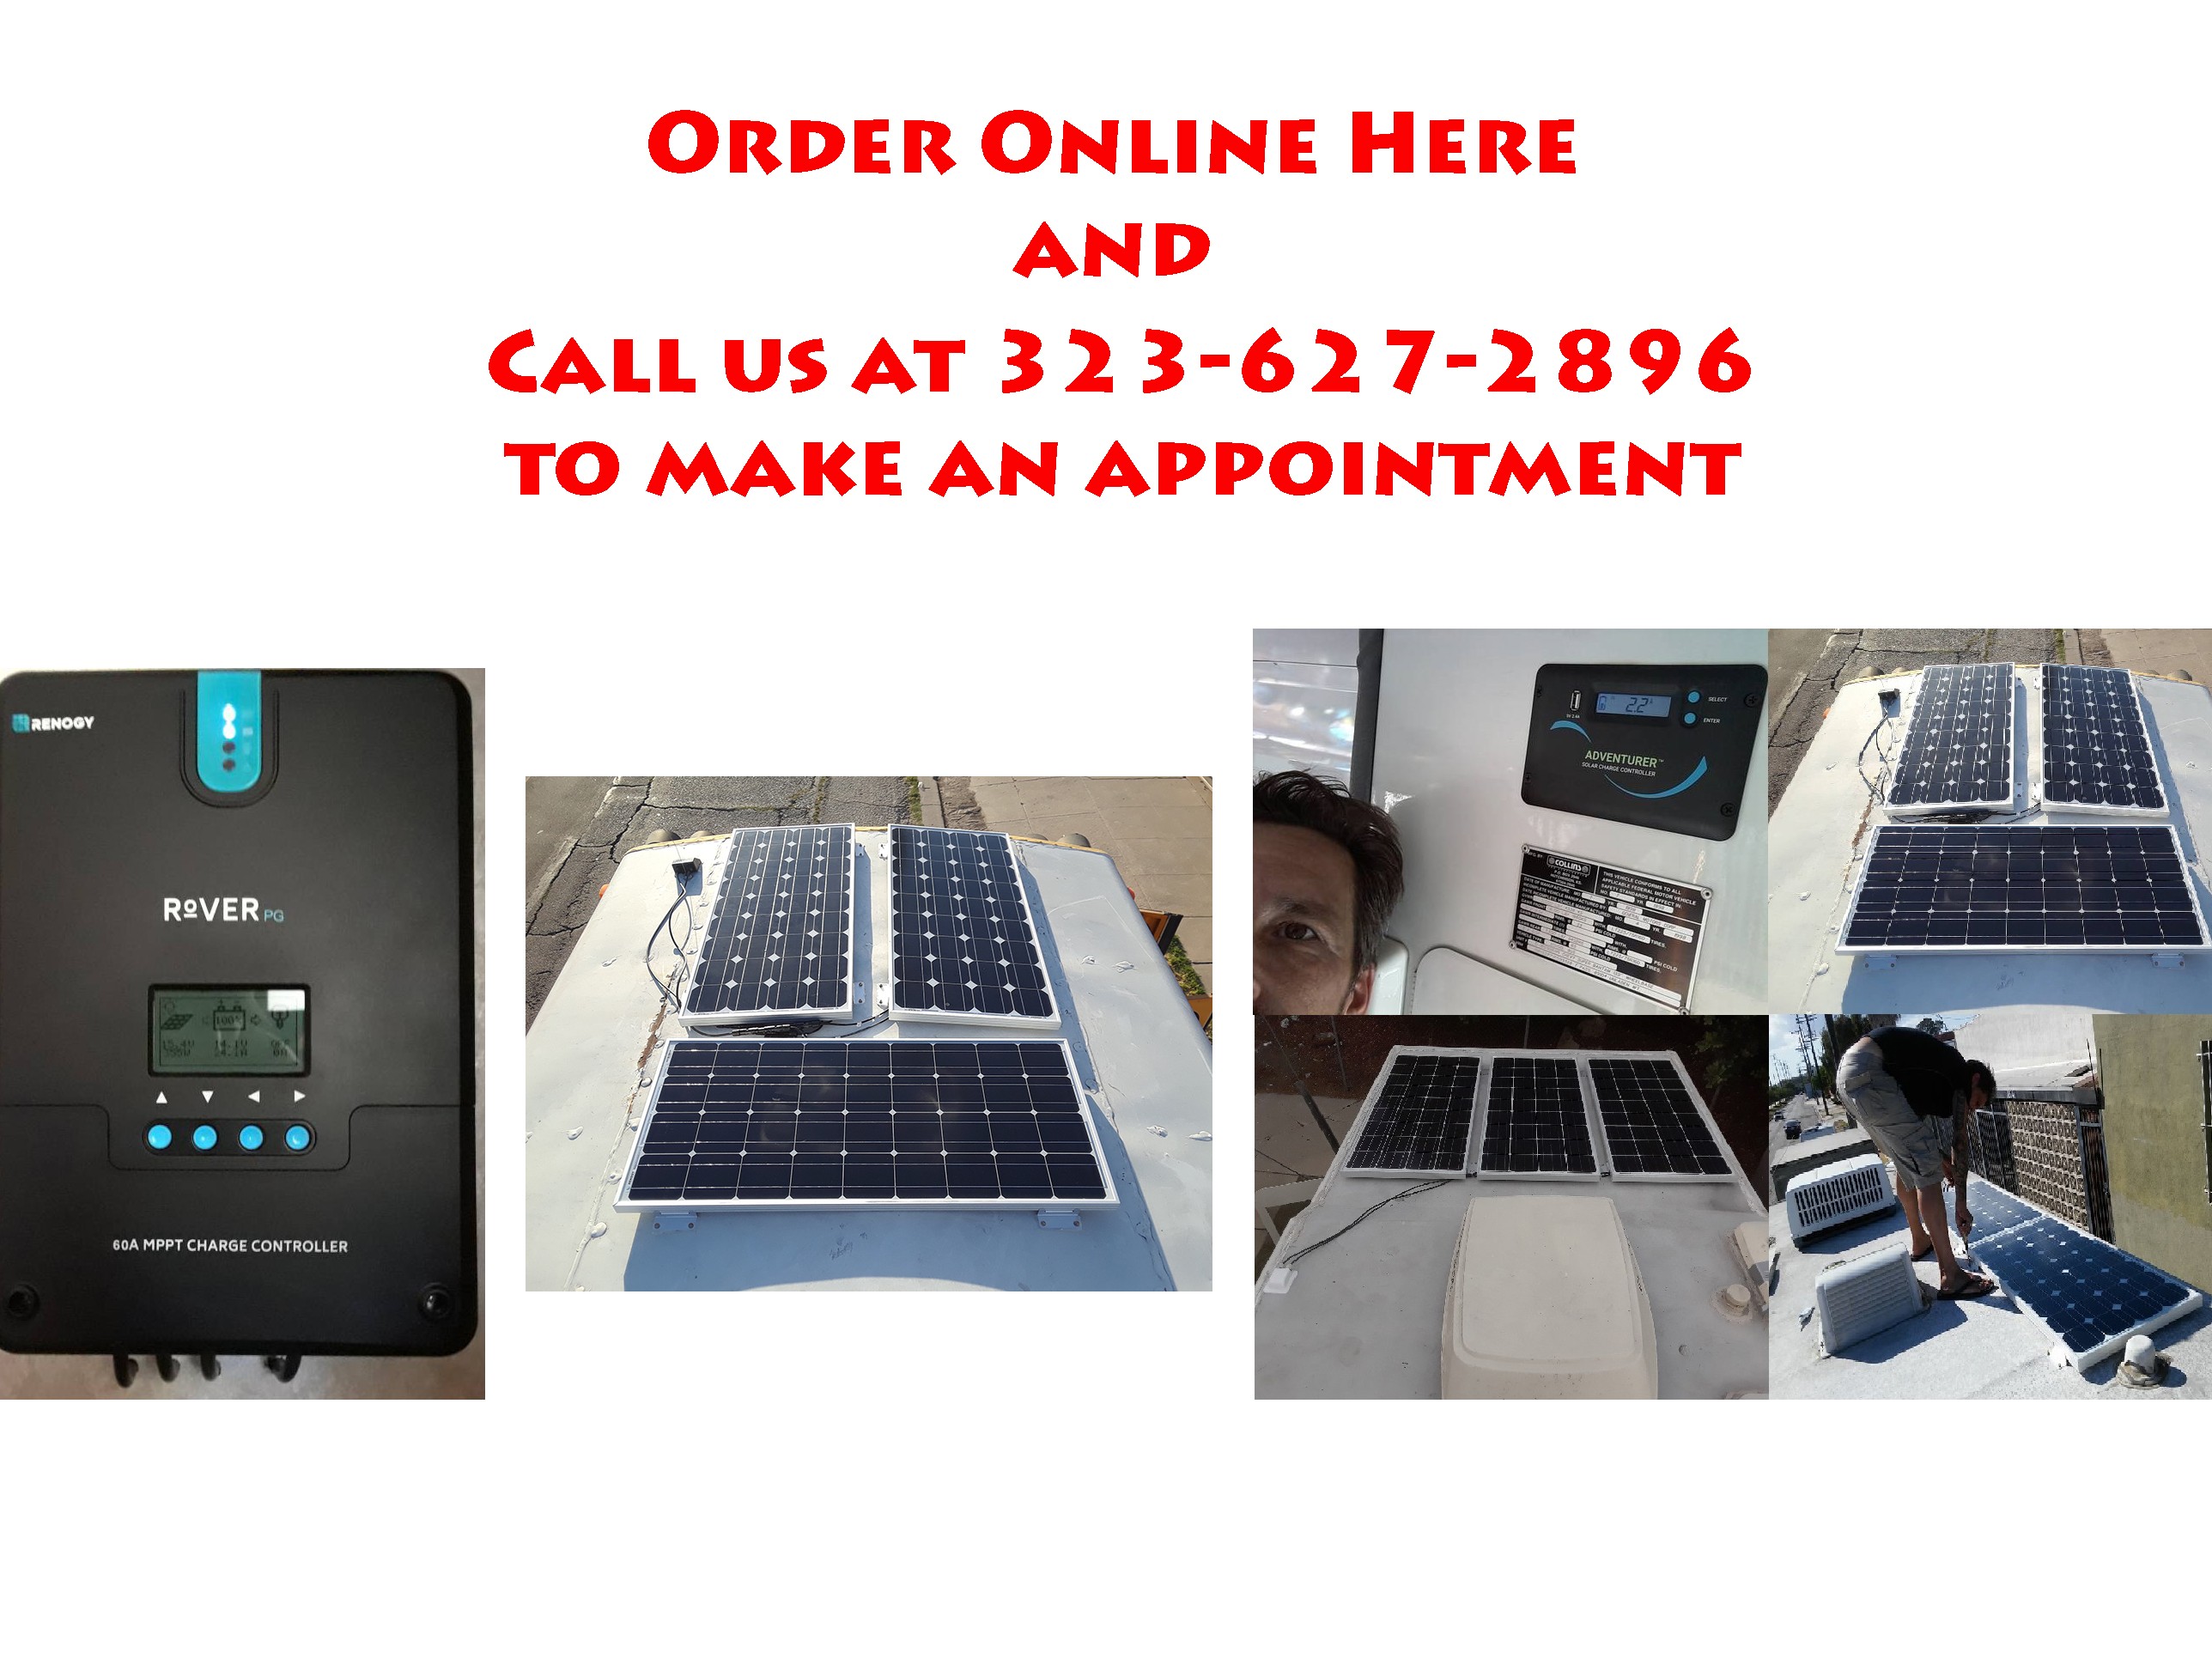 Order Online Here and Call 323-627-2896 to make an appointment for a Mobile Solar Installation!!